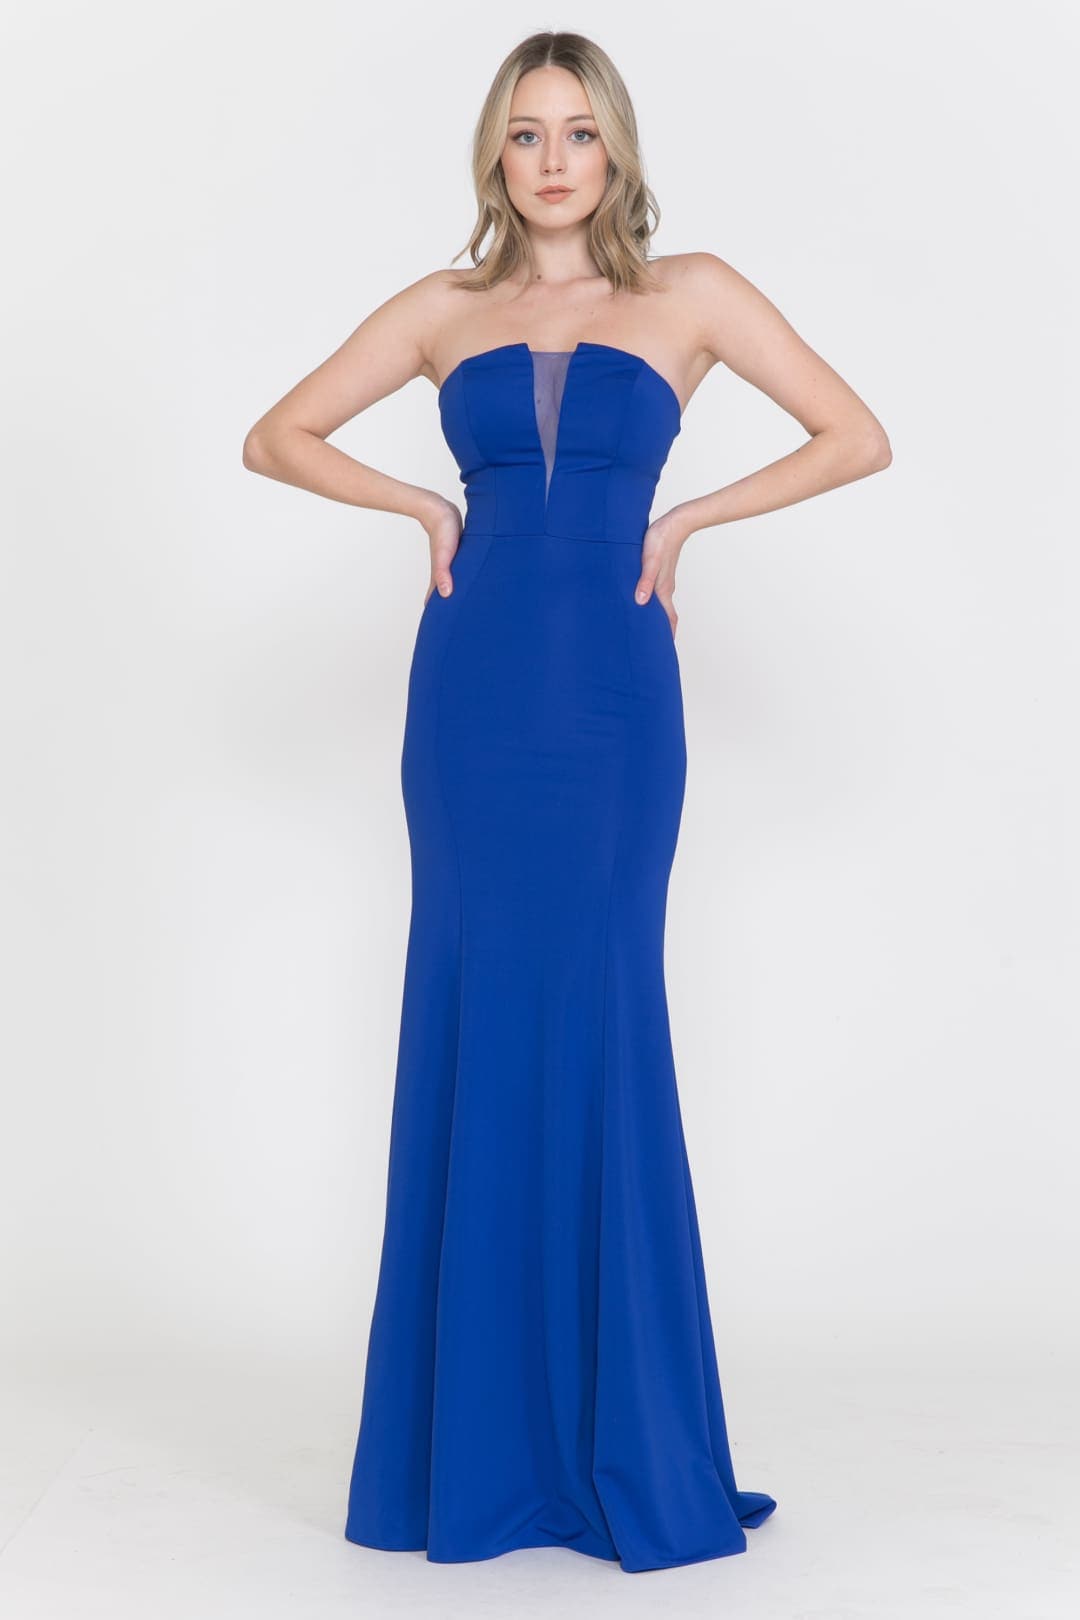 Prom Formal Gown - ROYAL BLUE / XS